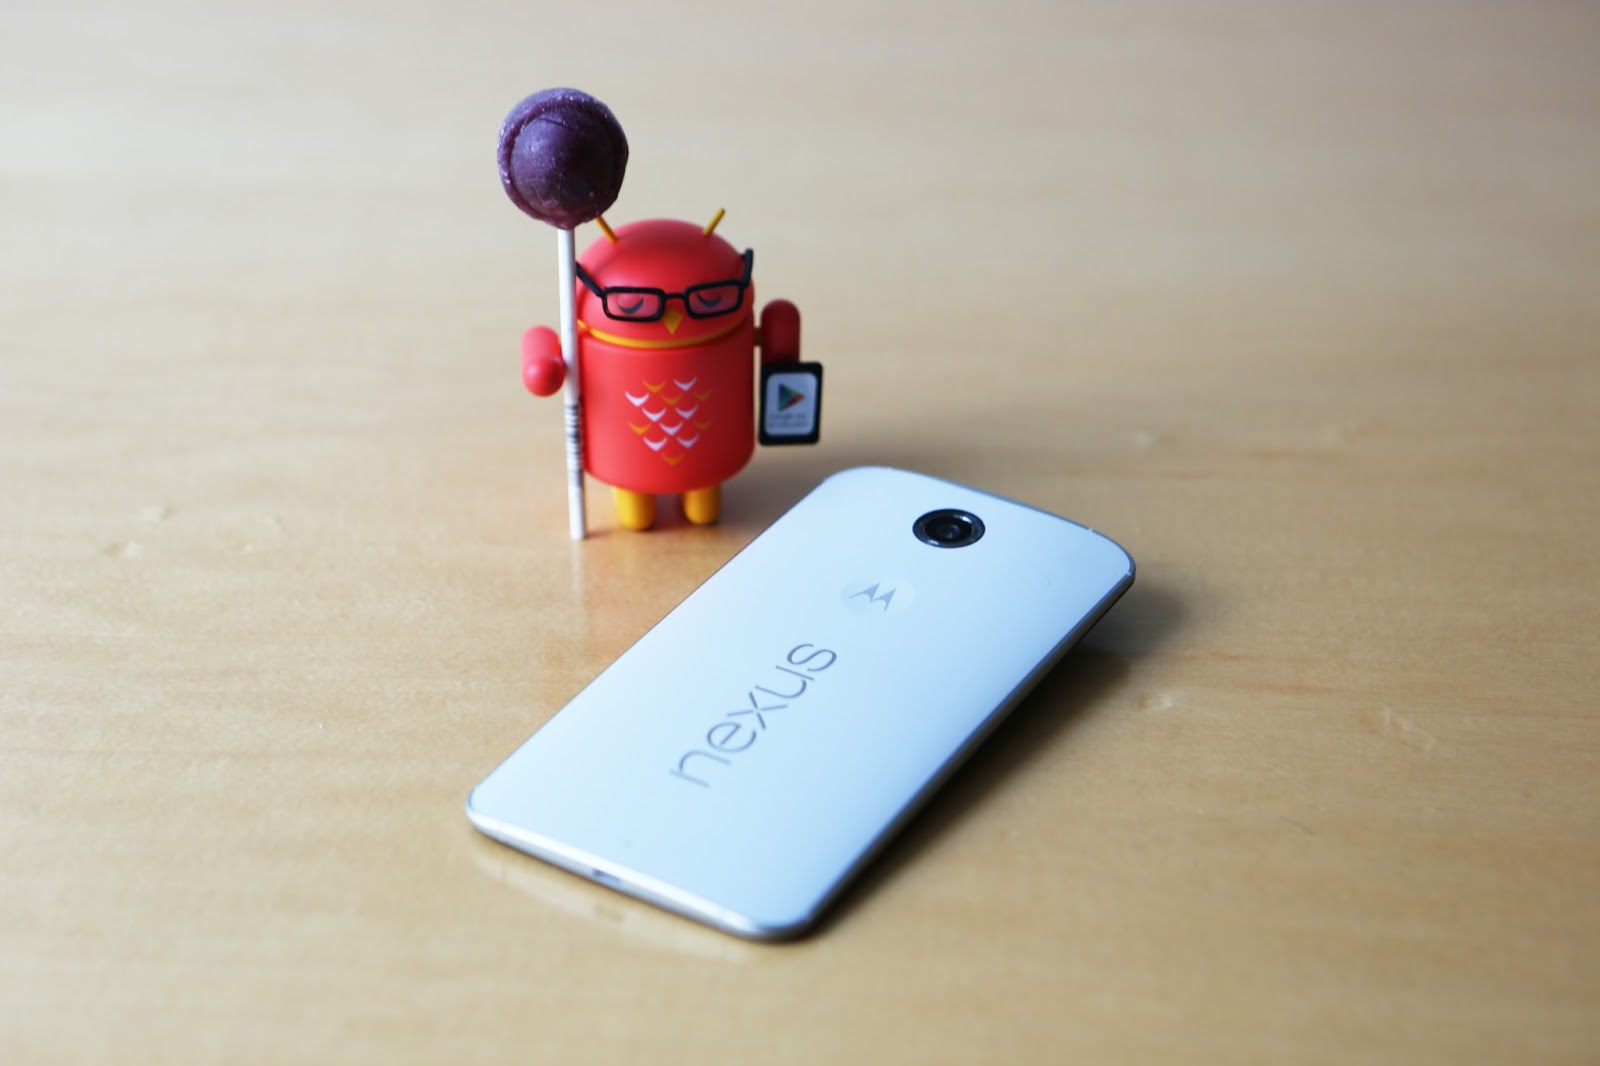 Google Nexus 6 now officially available in Malaysia